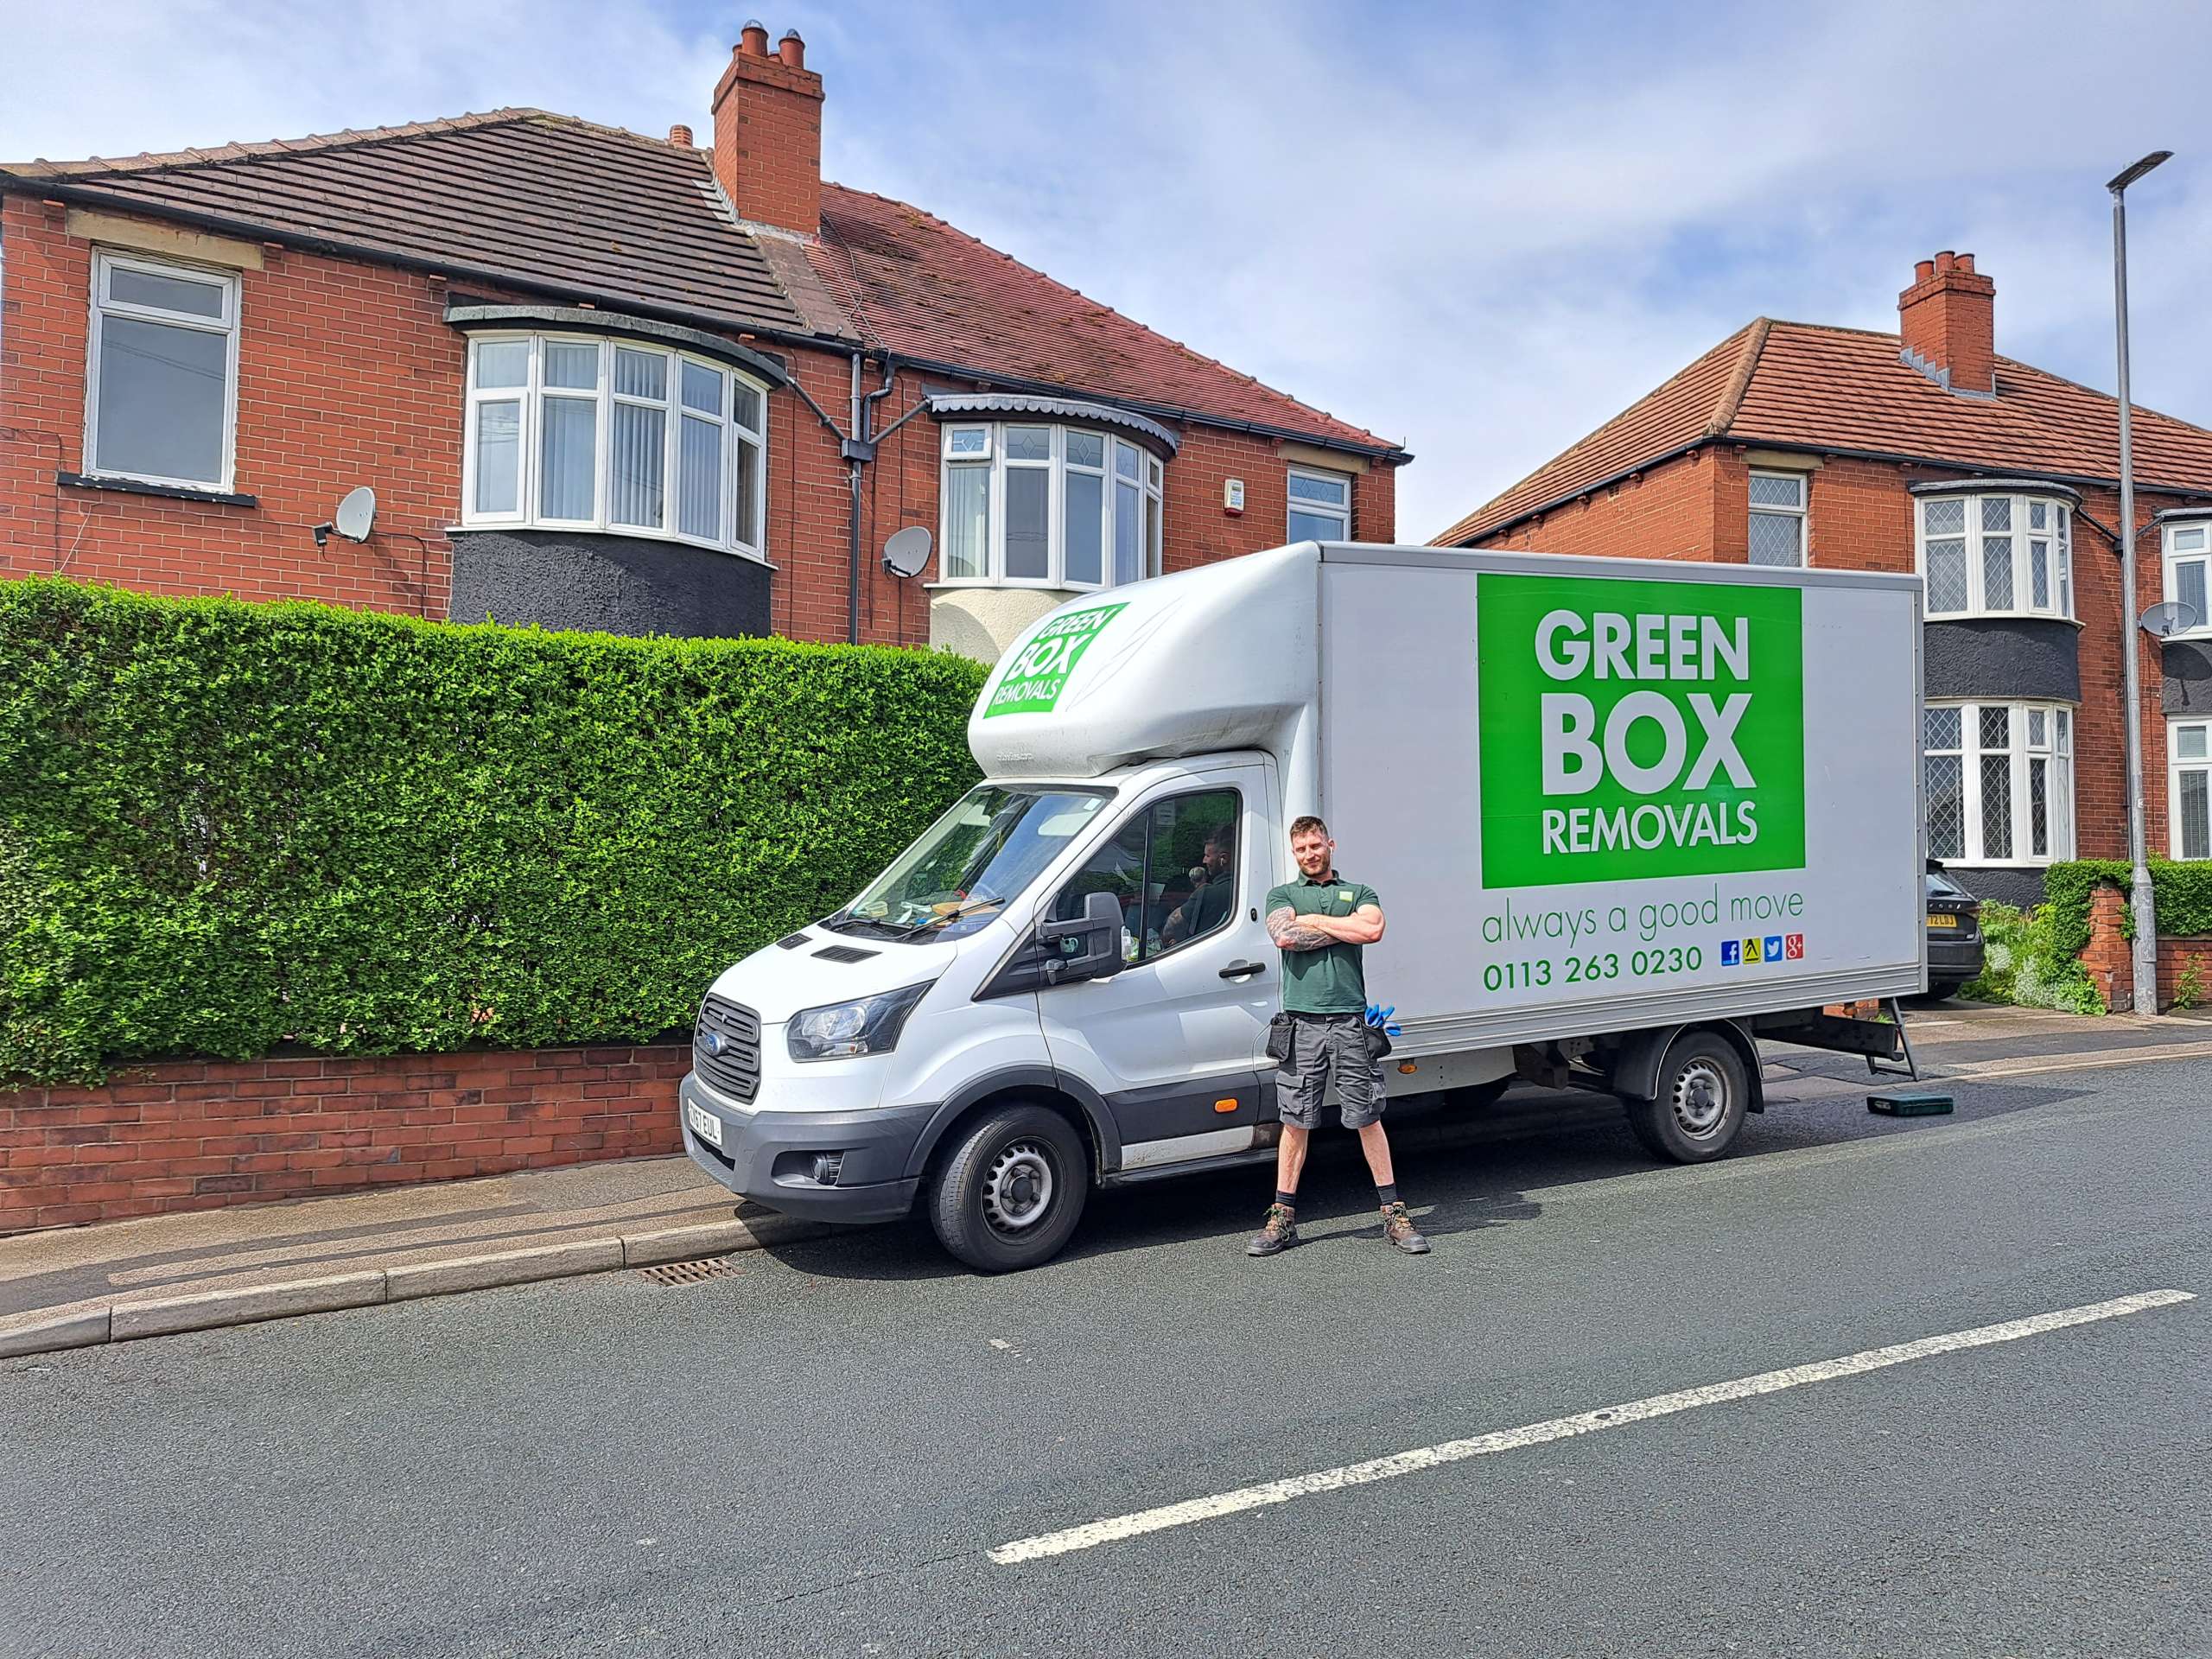 It’s Not Often This Happens To Greenbox Removals